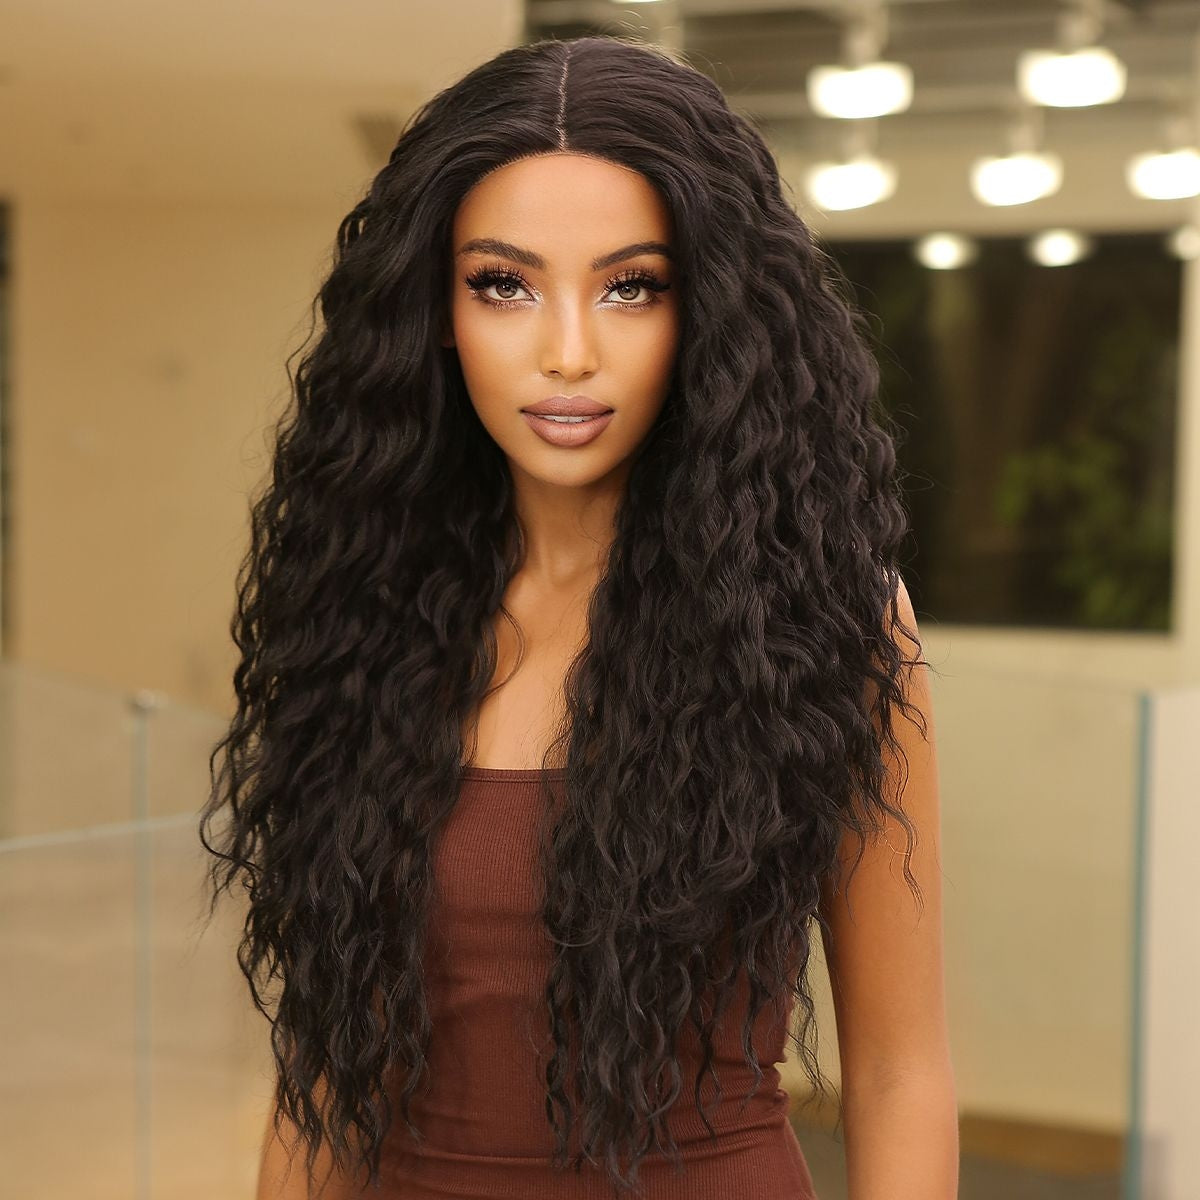 【Sphere 16】28-inch black and lace front wigs Long curly Wavy Wig for Women HC11030-1